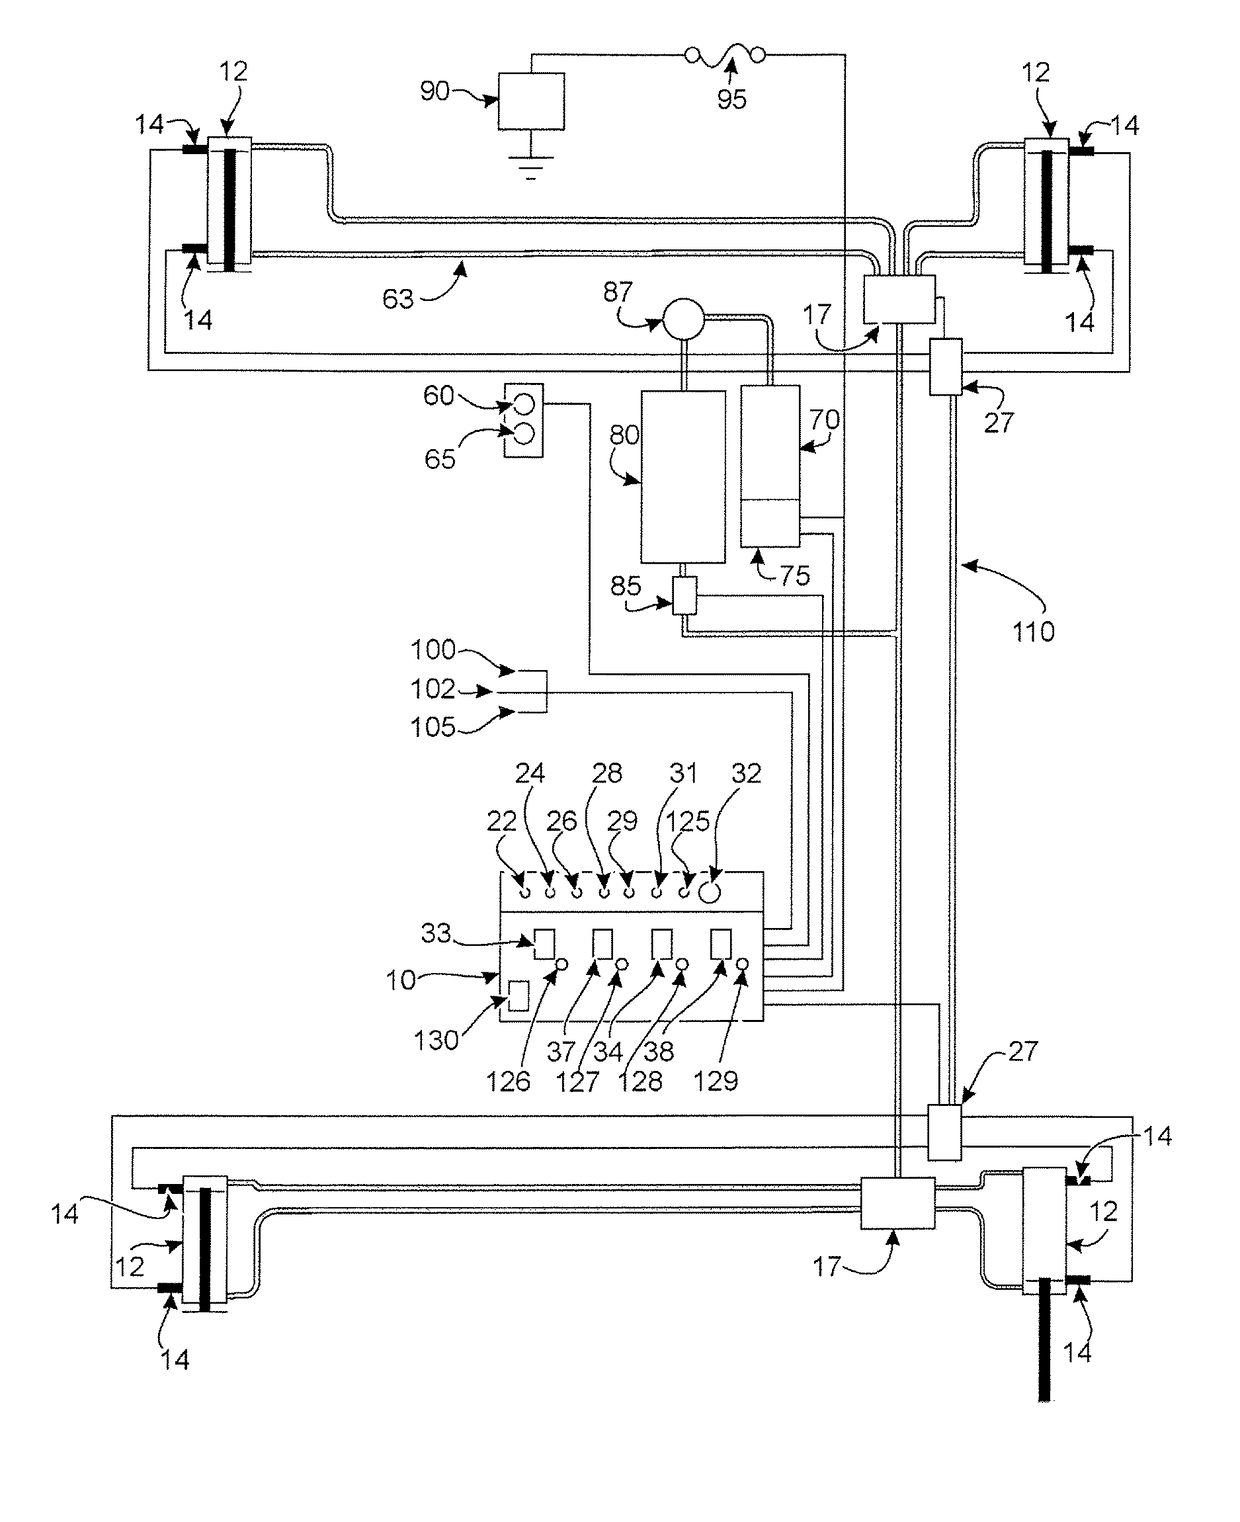 Electronic interface control system for a pneumatic vehicle safety lift system